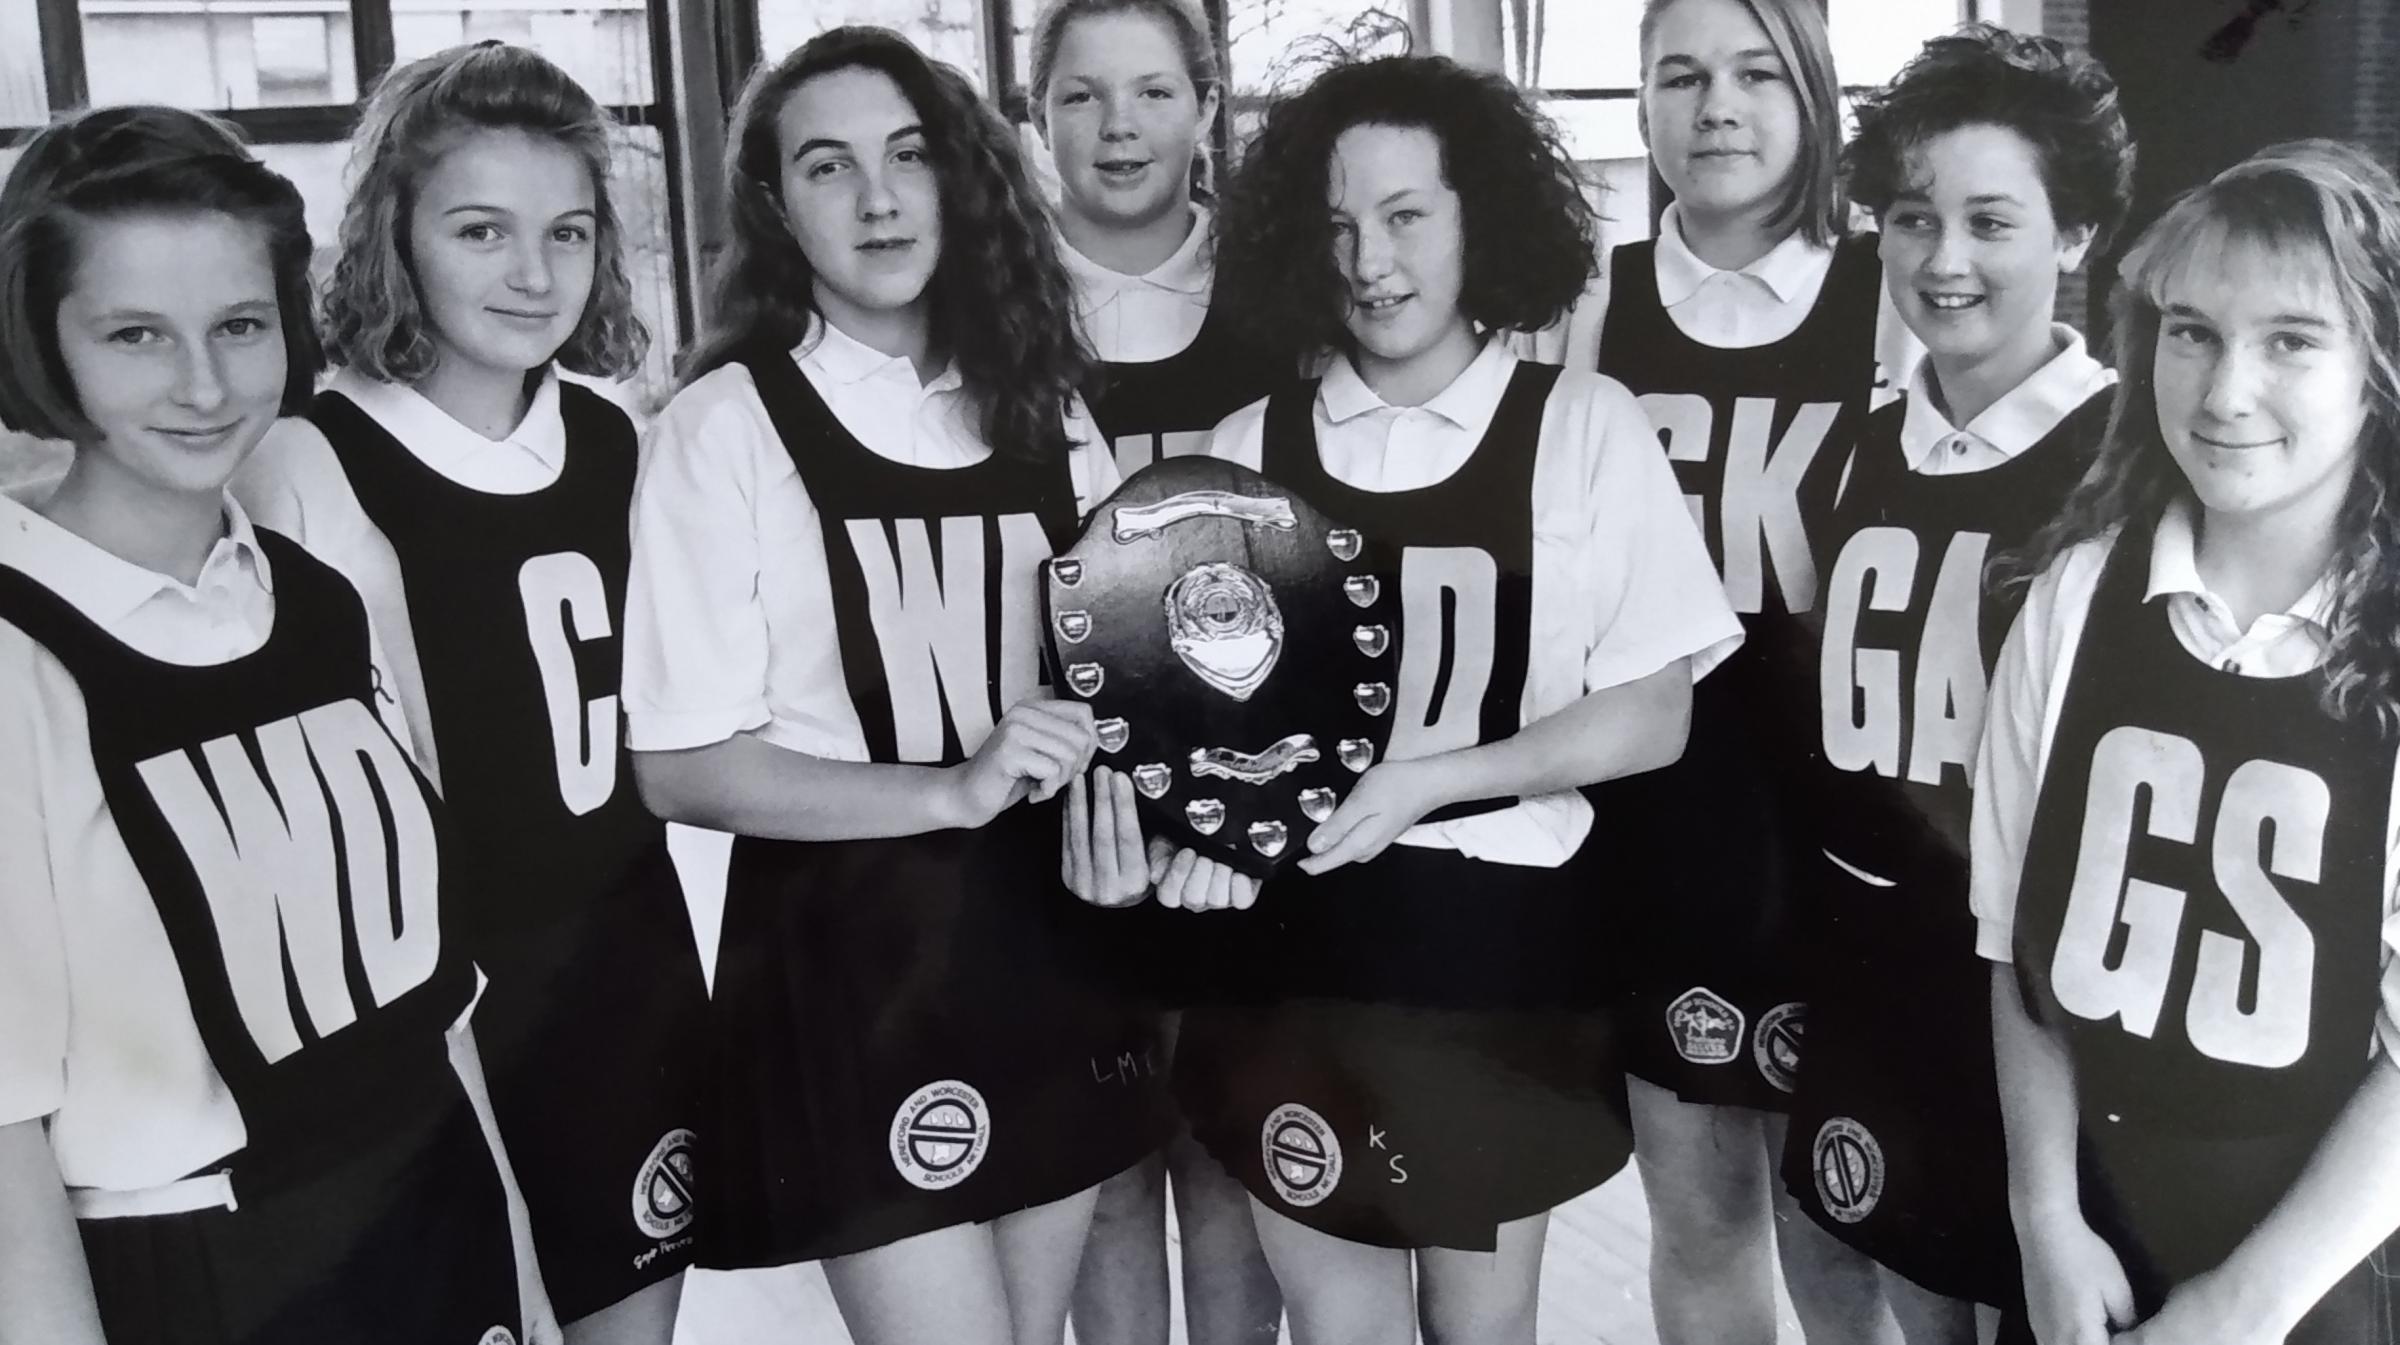 The schools Under-14 netball team are pictured in November 1991